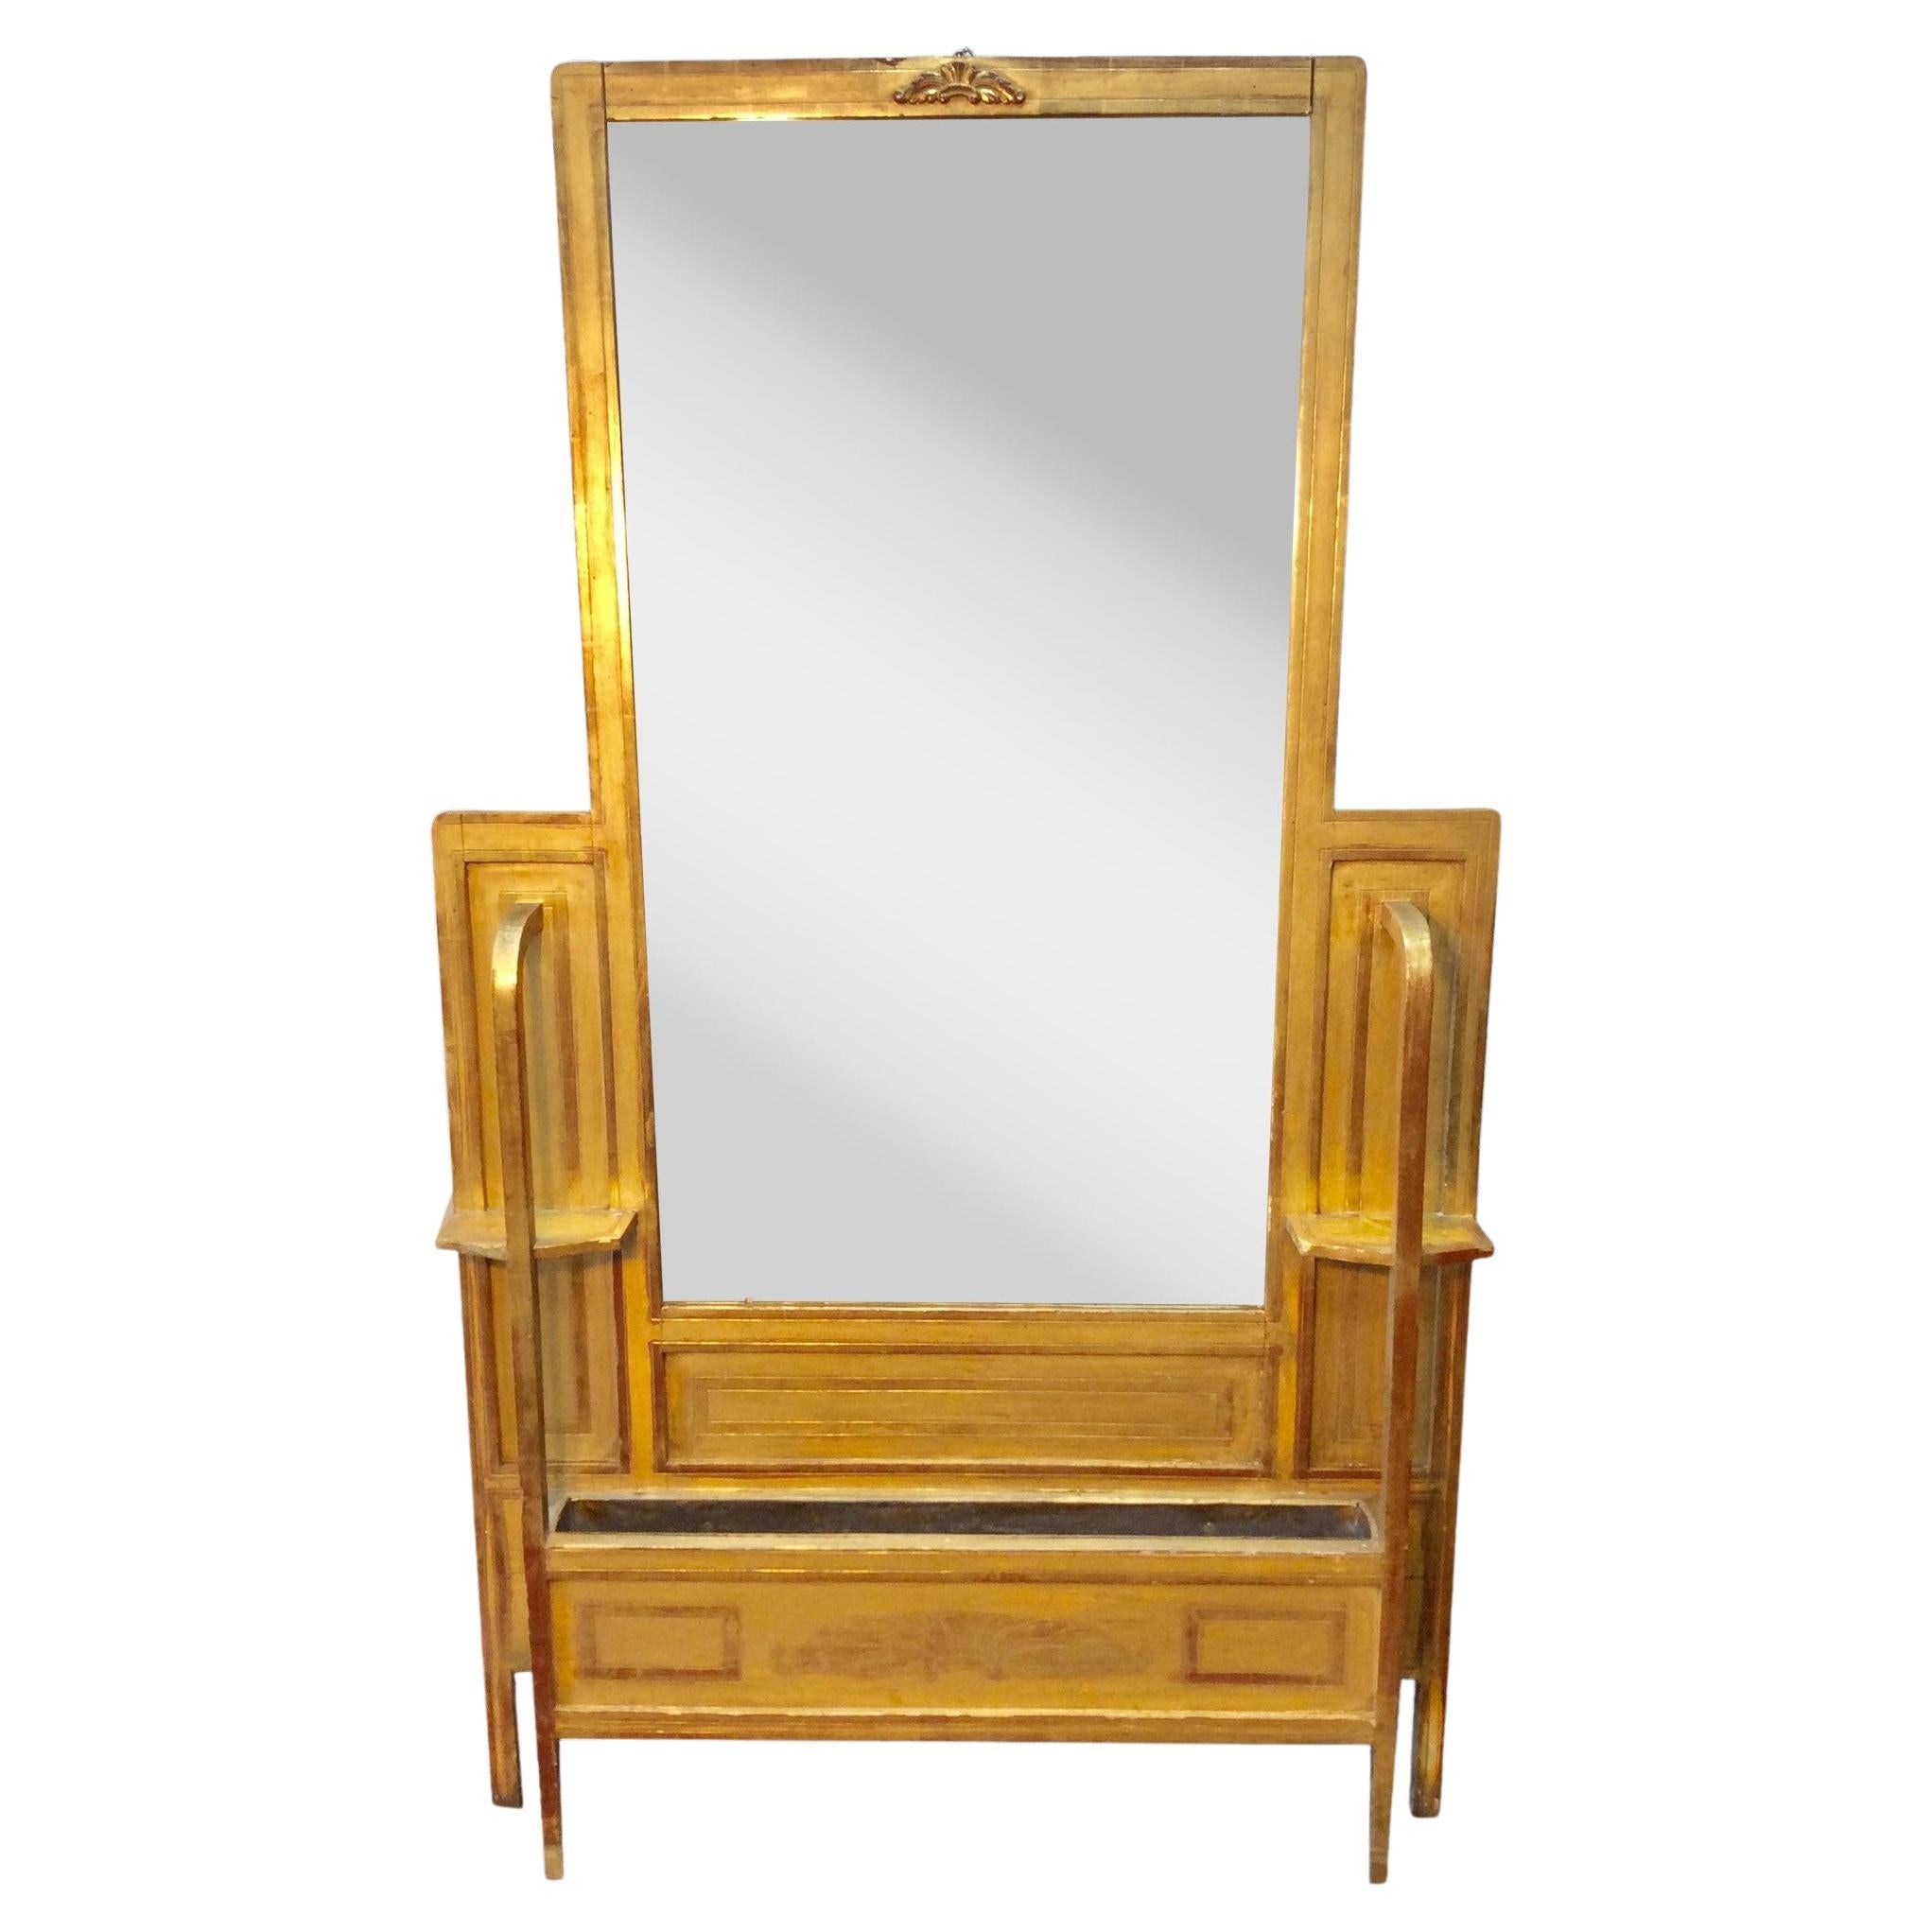 Early 1900s French Art Deco Gold Gilt Hall Mirror Jardinere For Sale